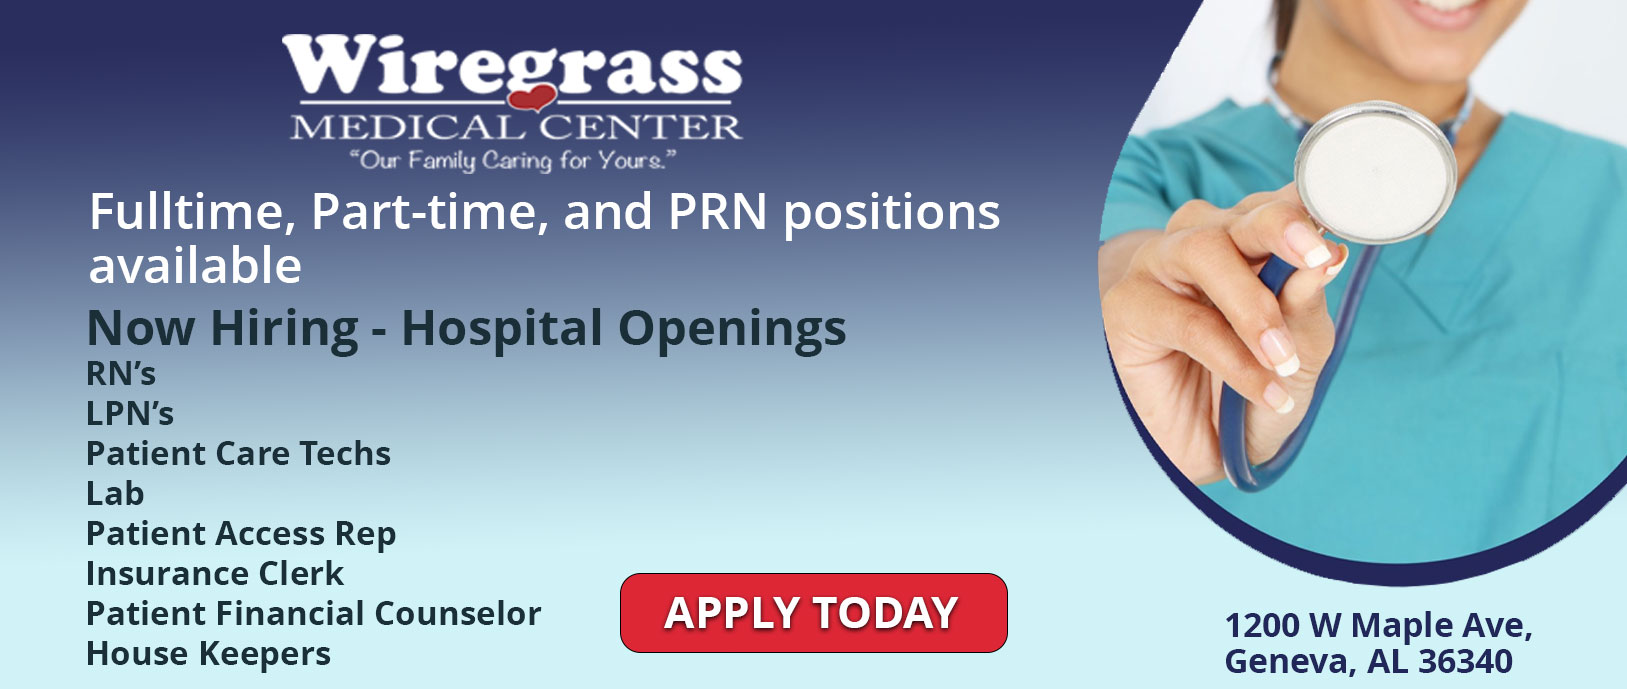 Full-time, Part-time, and PRN positions available 
Now Hiring- Hospital Openings
RN's
LPN's
Patient Care Techs
Lab
Patient Access Rep
Insurance Clerk
Patient Financial Counselor
Housekeepers

1200 W Maple Ave,
Geneva, AL 36340

(APPLY TODAY)